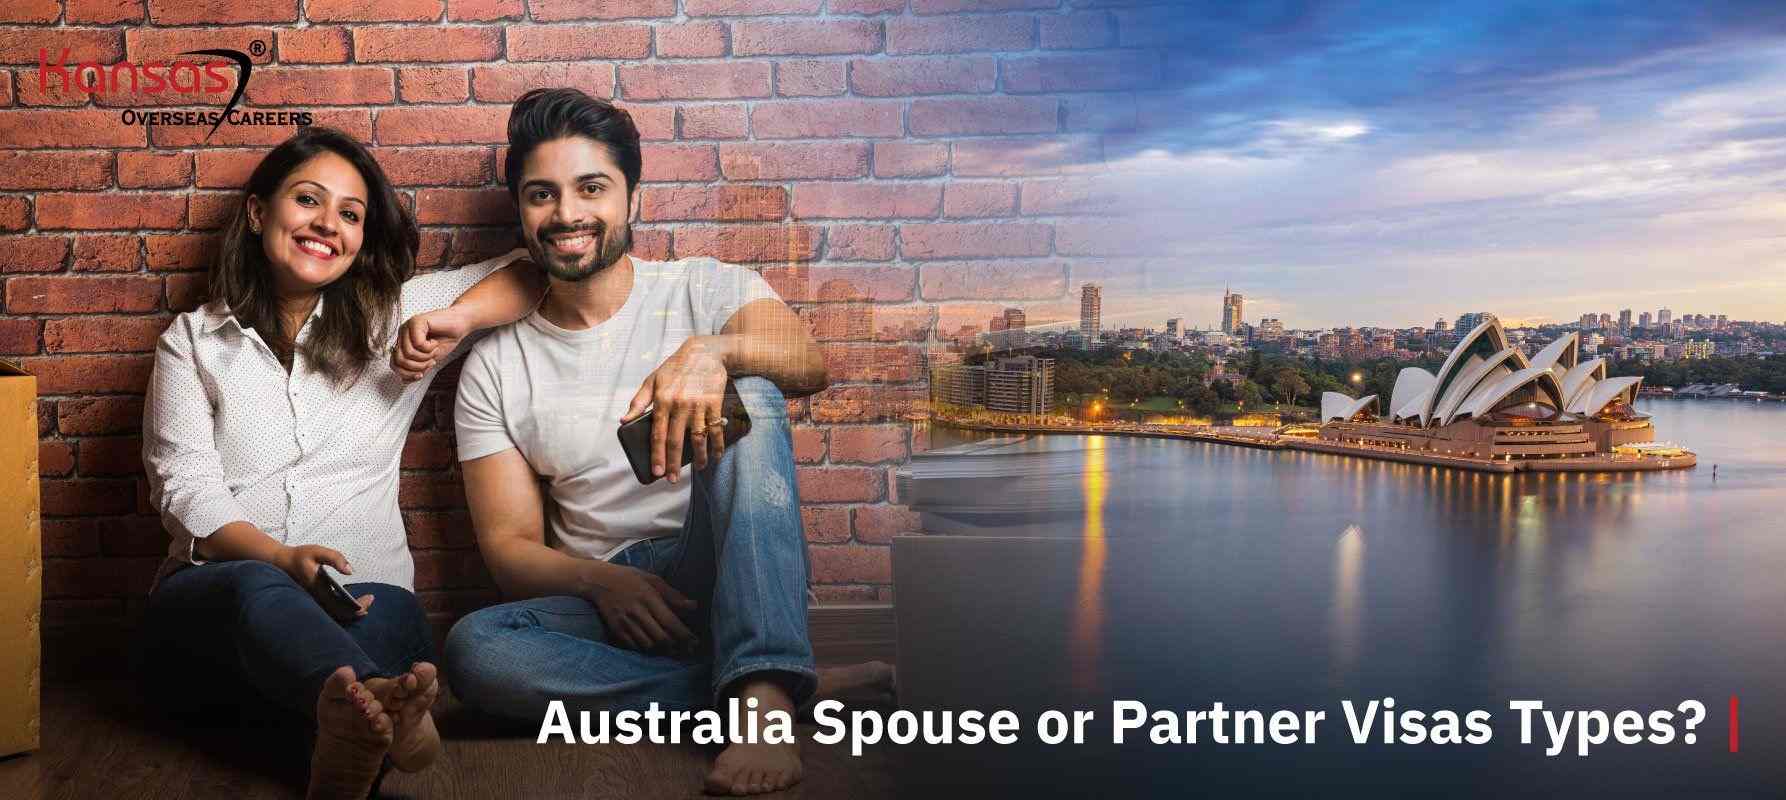 5 Questions You Might Have About Getting A Partner Visa